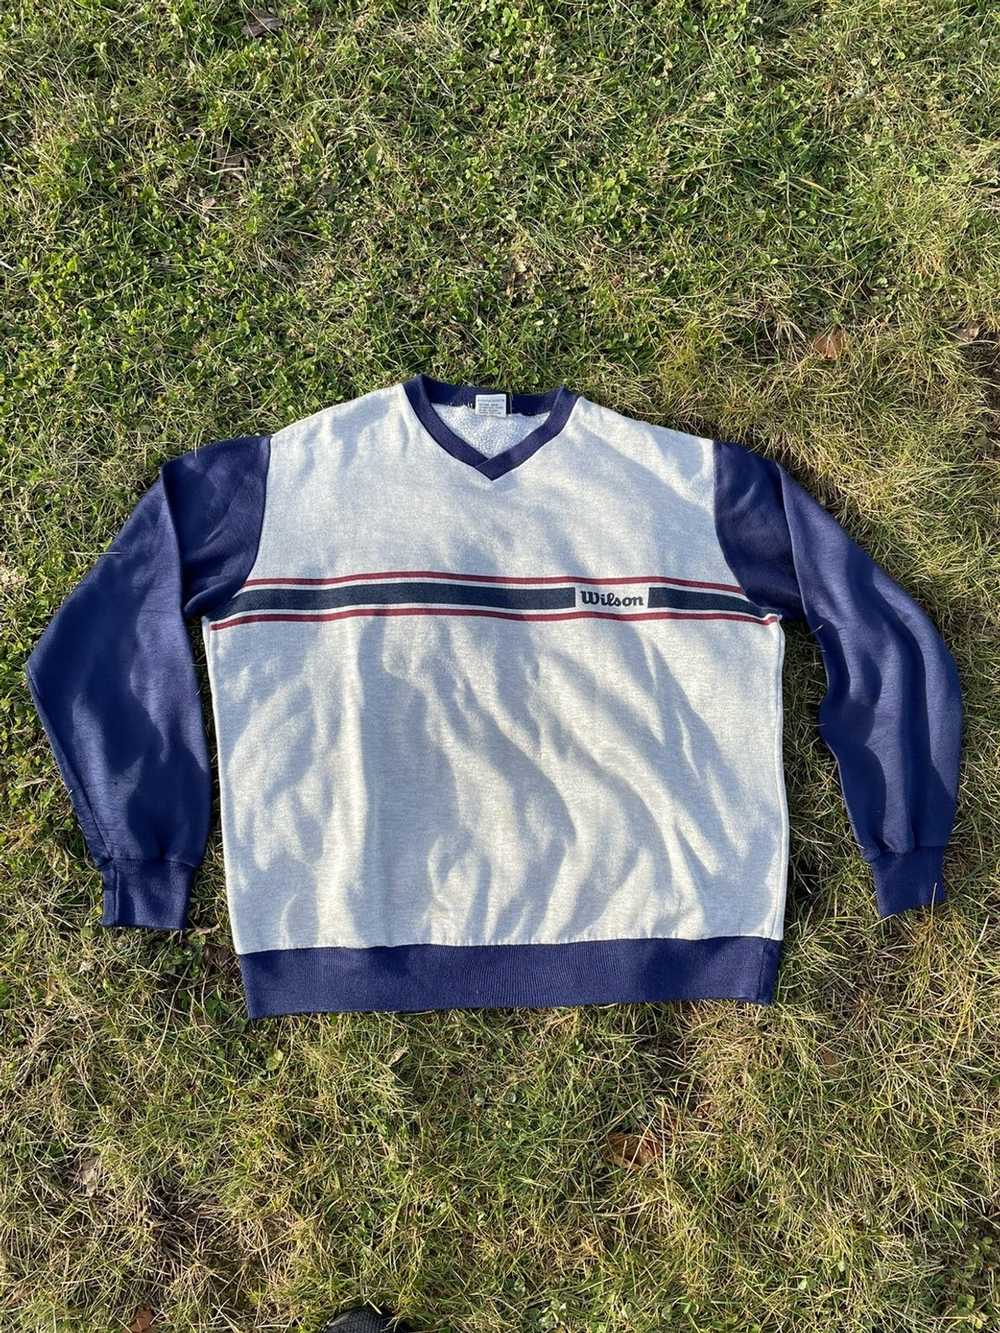 New XL 80's Wilson Baseball Jersey Men's Vintage Blue White 1980's Made in The U.S.A.